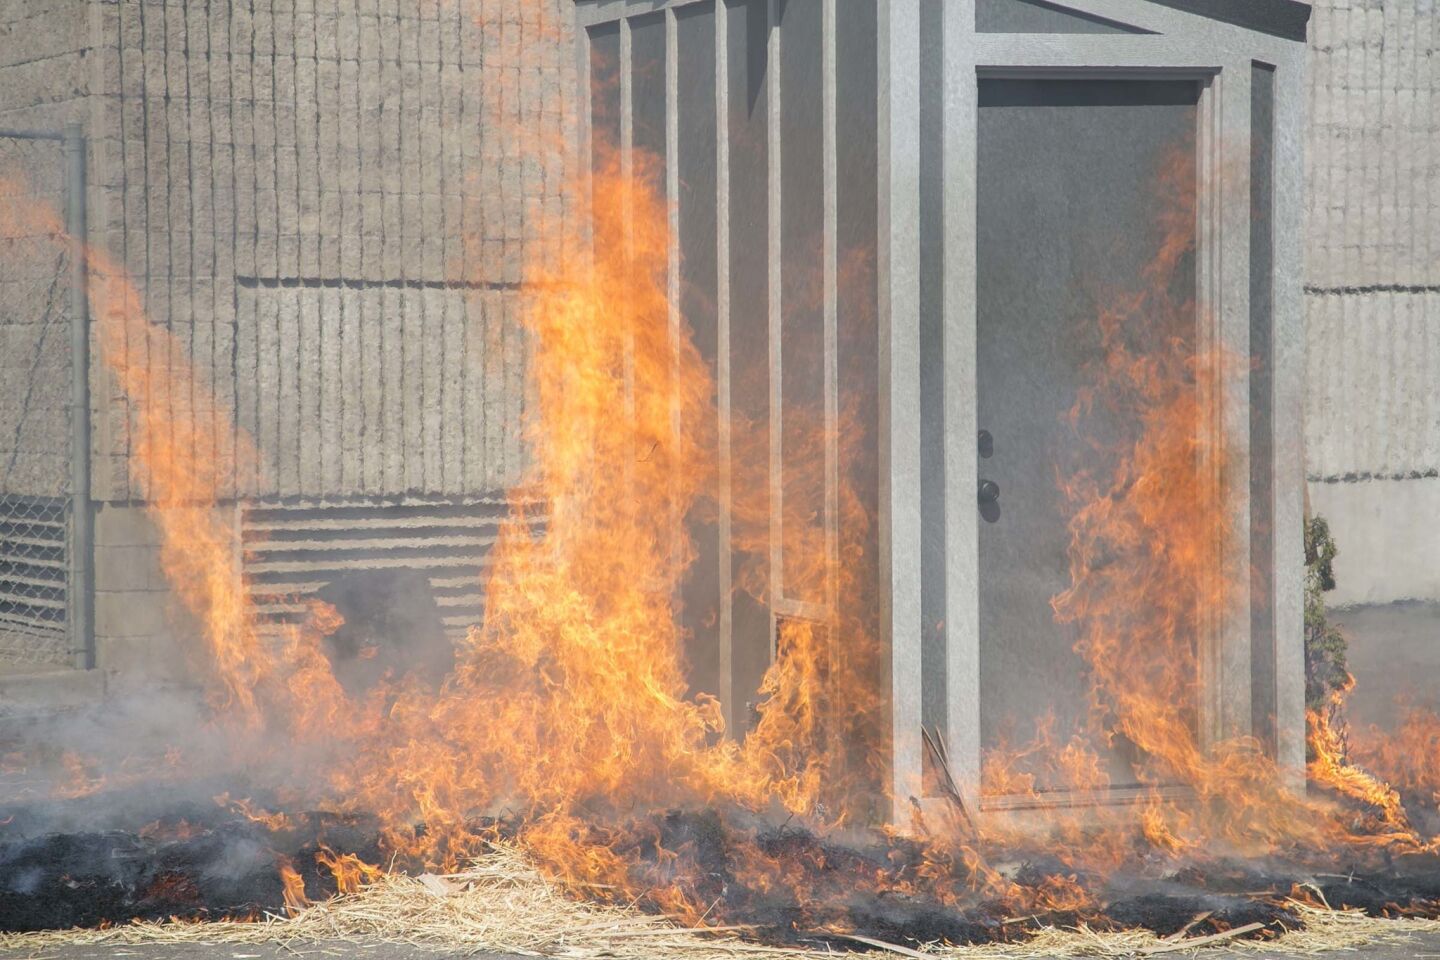 Combustibles were lit on fire around a fire proofed shed to demonstrate it's resistance in the event of a wildfire. A company called "Mighty Fire Breaker" is manufacturing the shed that is fire proof for protecting valuables from wildfire.